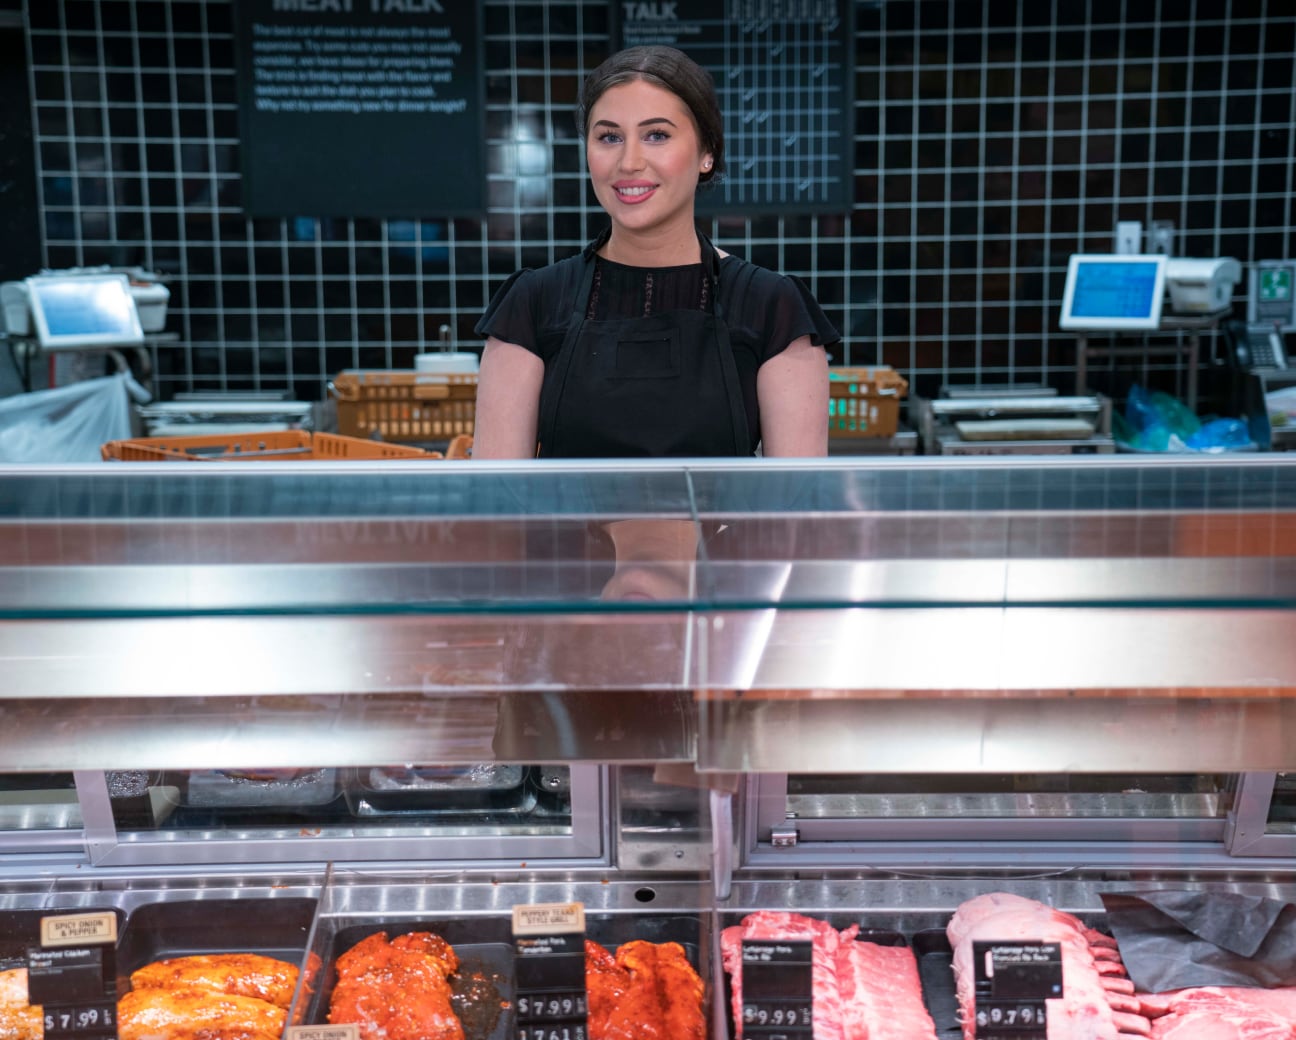 Young employee smiling behind a meat counter at a grocery store.